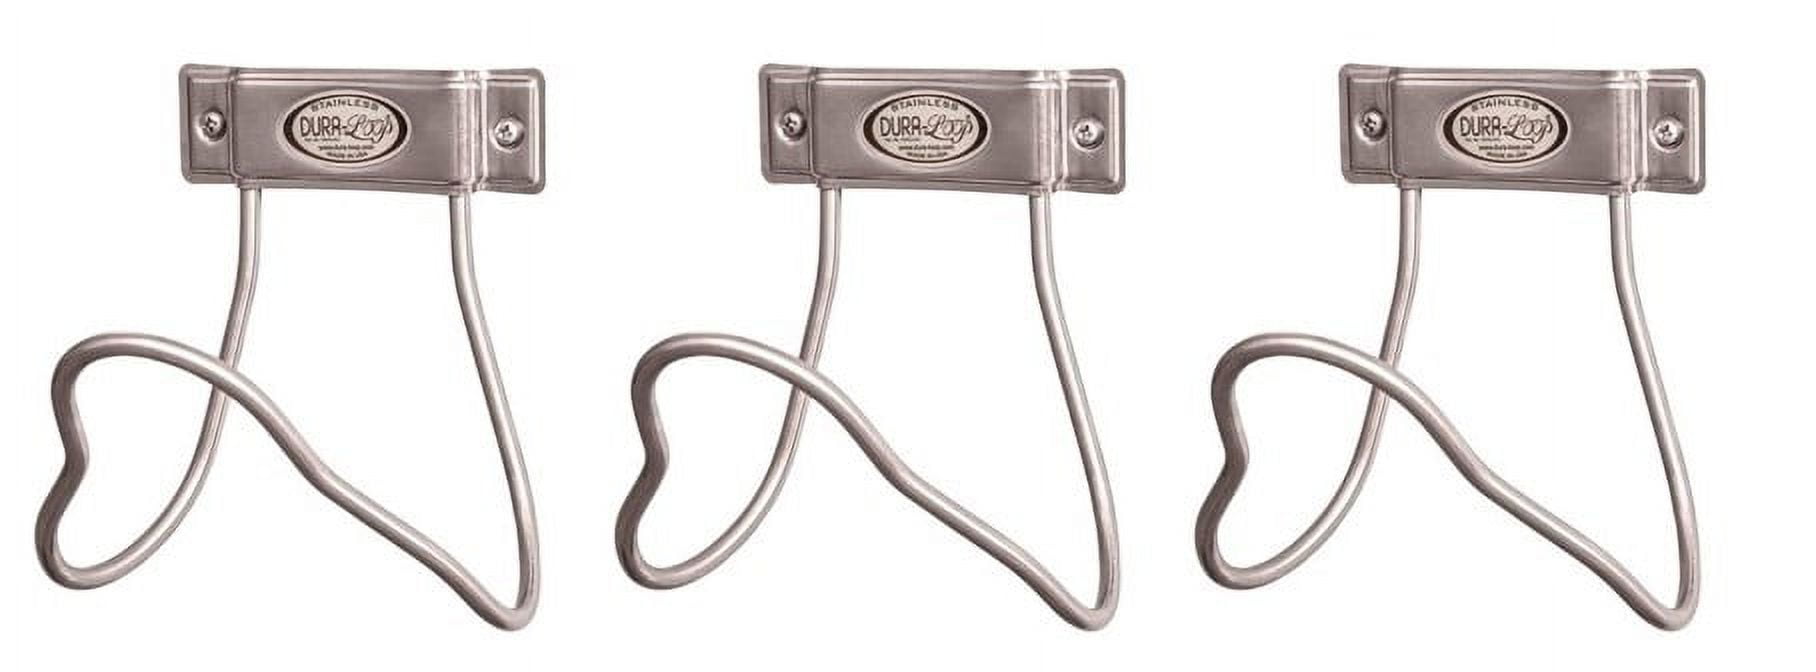 Dura-Loop Stainless Steel Water Hose Hanger Large USA Made (3-Pack) 